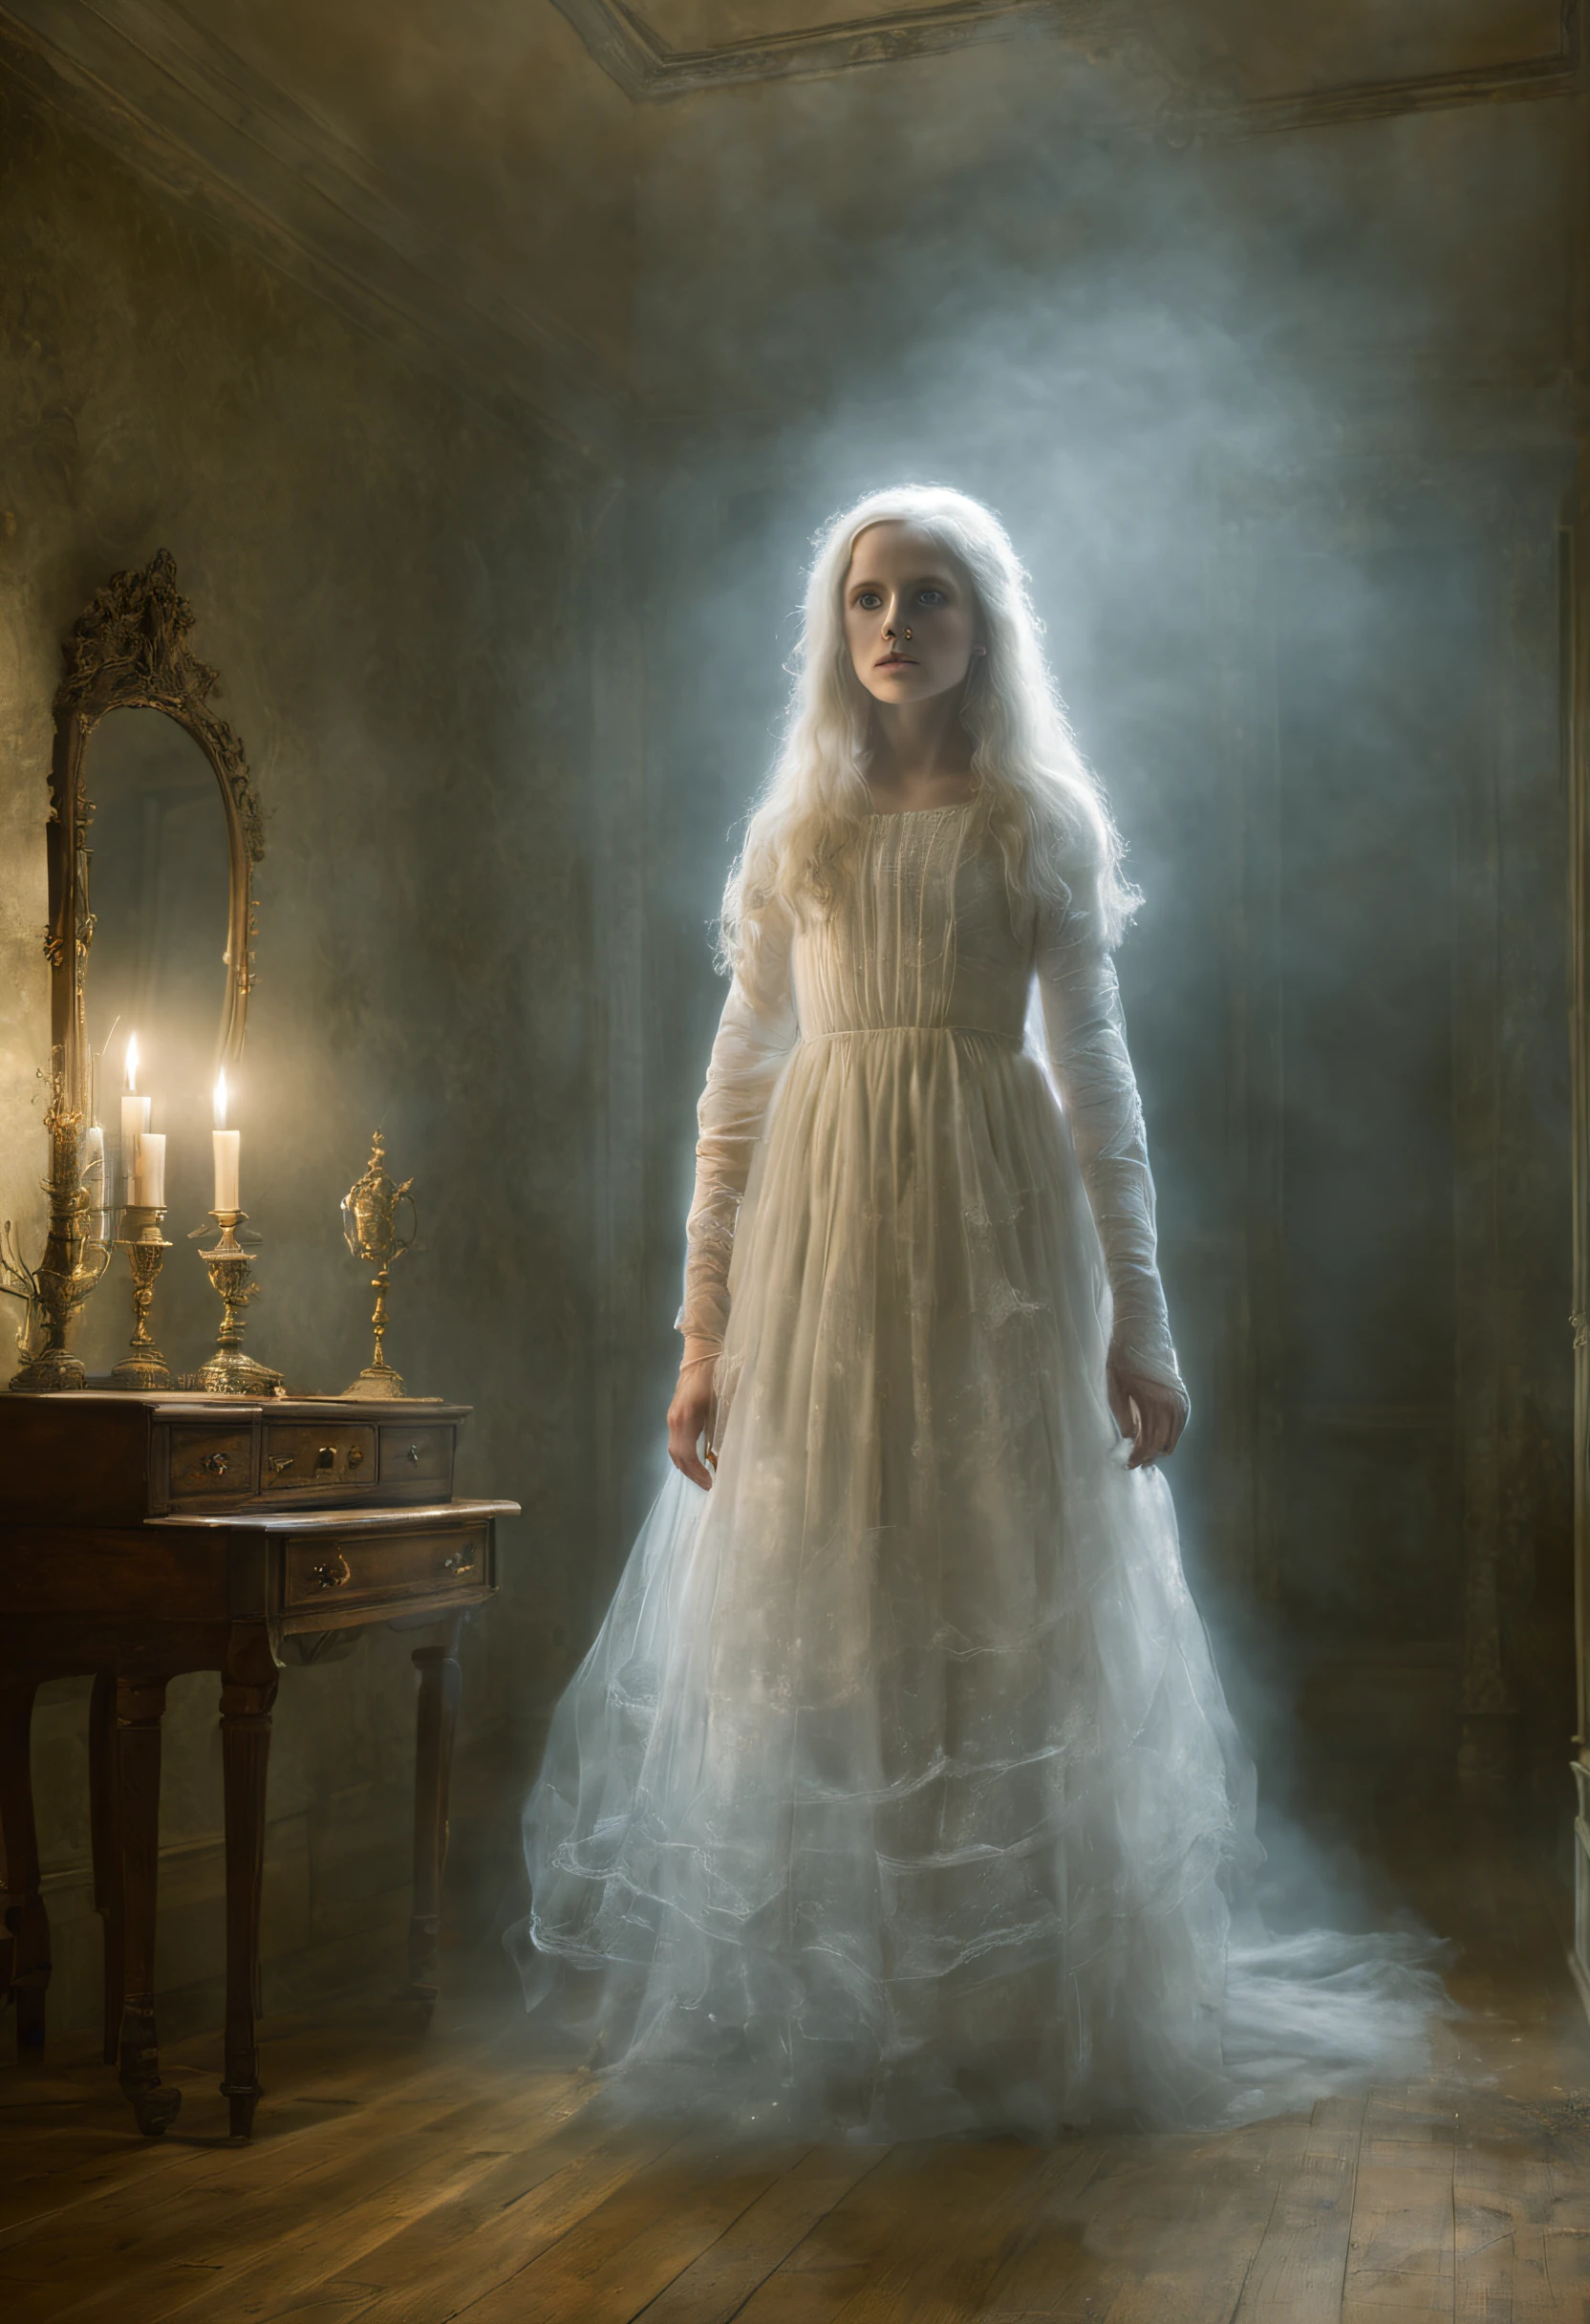 A girl staring in awe at the glowing, ethereal figure of Casper's ghost, which is hovering in the center of a dark, mysterious room. The ghost is illuminated by a soft, otherworldly light and emanates a sense of both playfulness and wonder. The room itself is adorned with antique furniture and ornate decorations, adding to the overall eerie atmosphere. The walls are lined with faded, peeling wallpaper, giving a sense of history and age. The girl is dressed in a flowing, white gown and her eyes are filled with curiosity and a hint of fear. She stands near a cracked mirror, reflecting the ghostly figure, and delicate dust particles float in the air, creating an almost magical ambiance. The scene is rendered in high resolution, capturing every intricate detail and texture, from the delicate lace on the girl's dress to the subtle variations in the ghost's ethereal form. The overall color palette is muted, with deep blues and purples dominating the room, creating a sense of mystery and intrigue. The lighting is dim, with soft, diffused light casting long, haunting shadows across the room. The prompt aims to evoke a sense of fantasy and wonder, capturing the essence of Casper's ghost in a dark, enchanting setting.